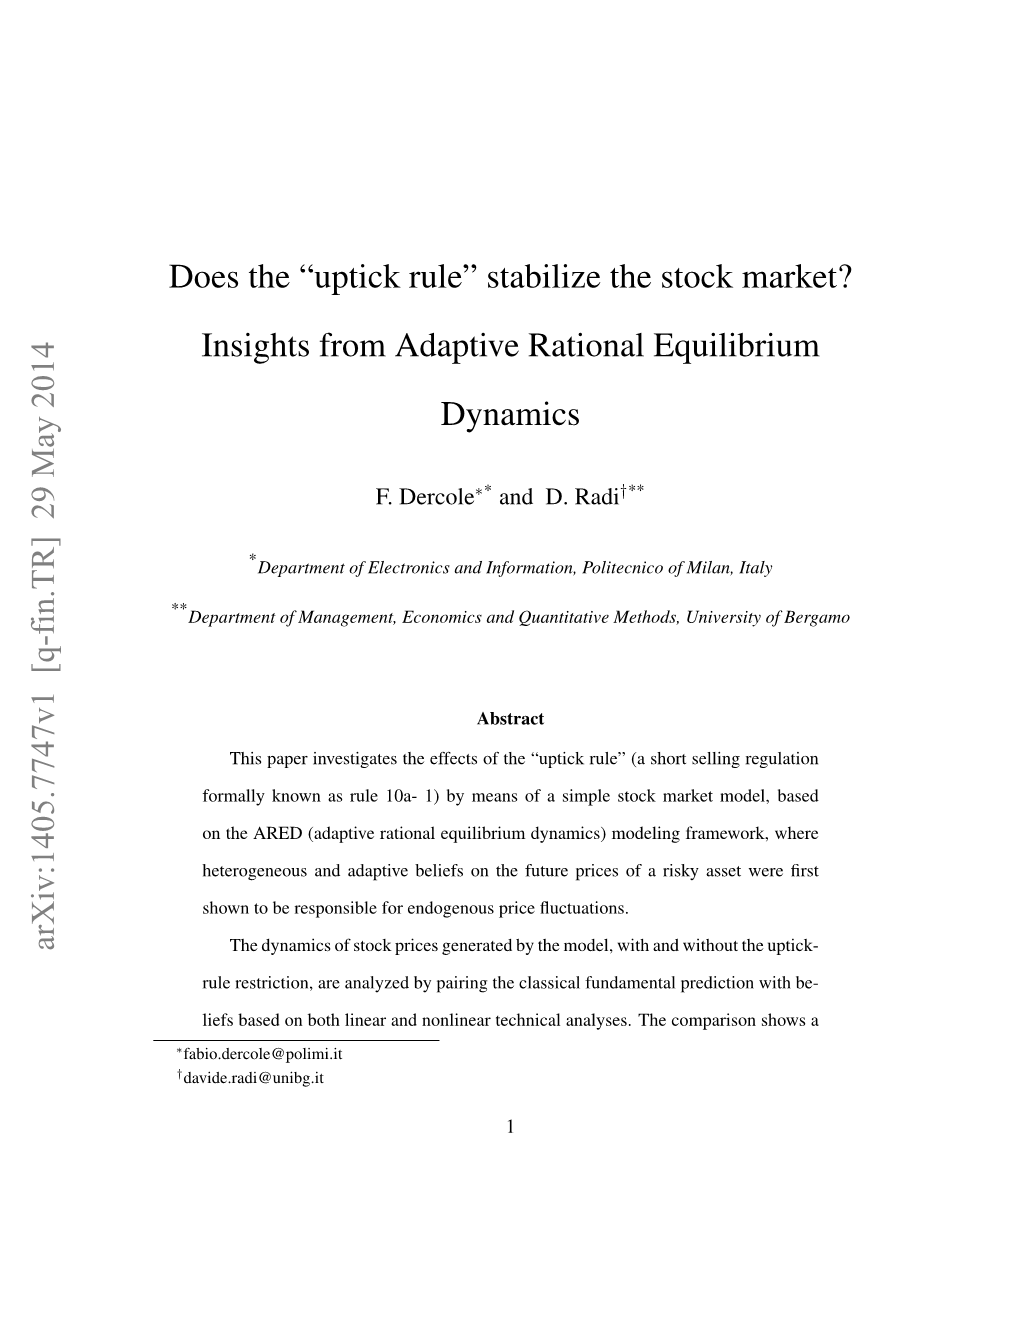 Uptick Rule” Stabilize the Stock Market? Insights from Adaptive Rational Equilibrium Dynamics